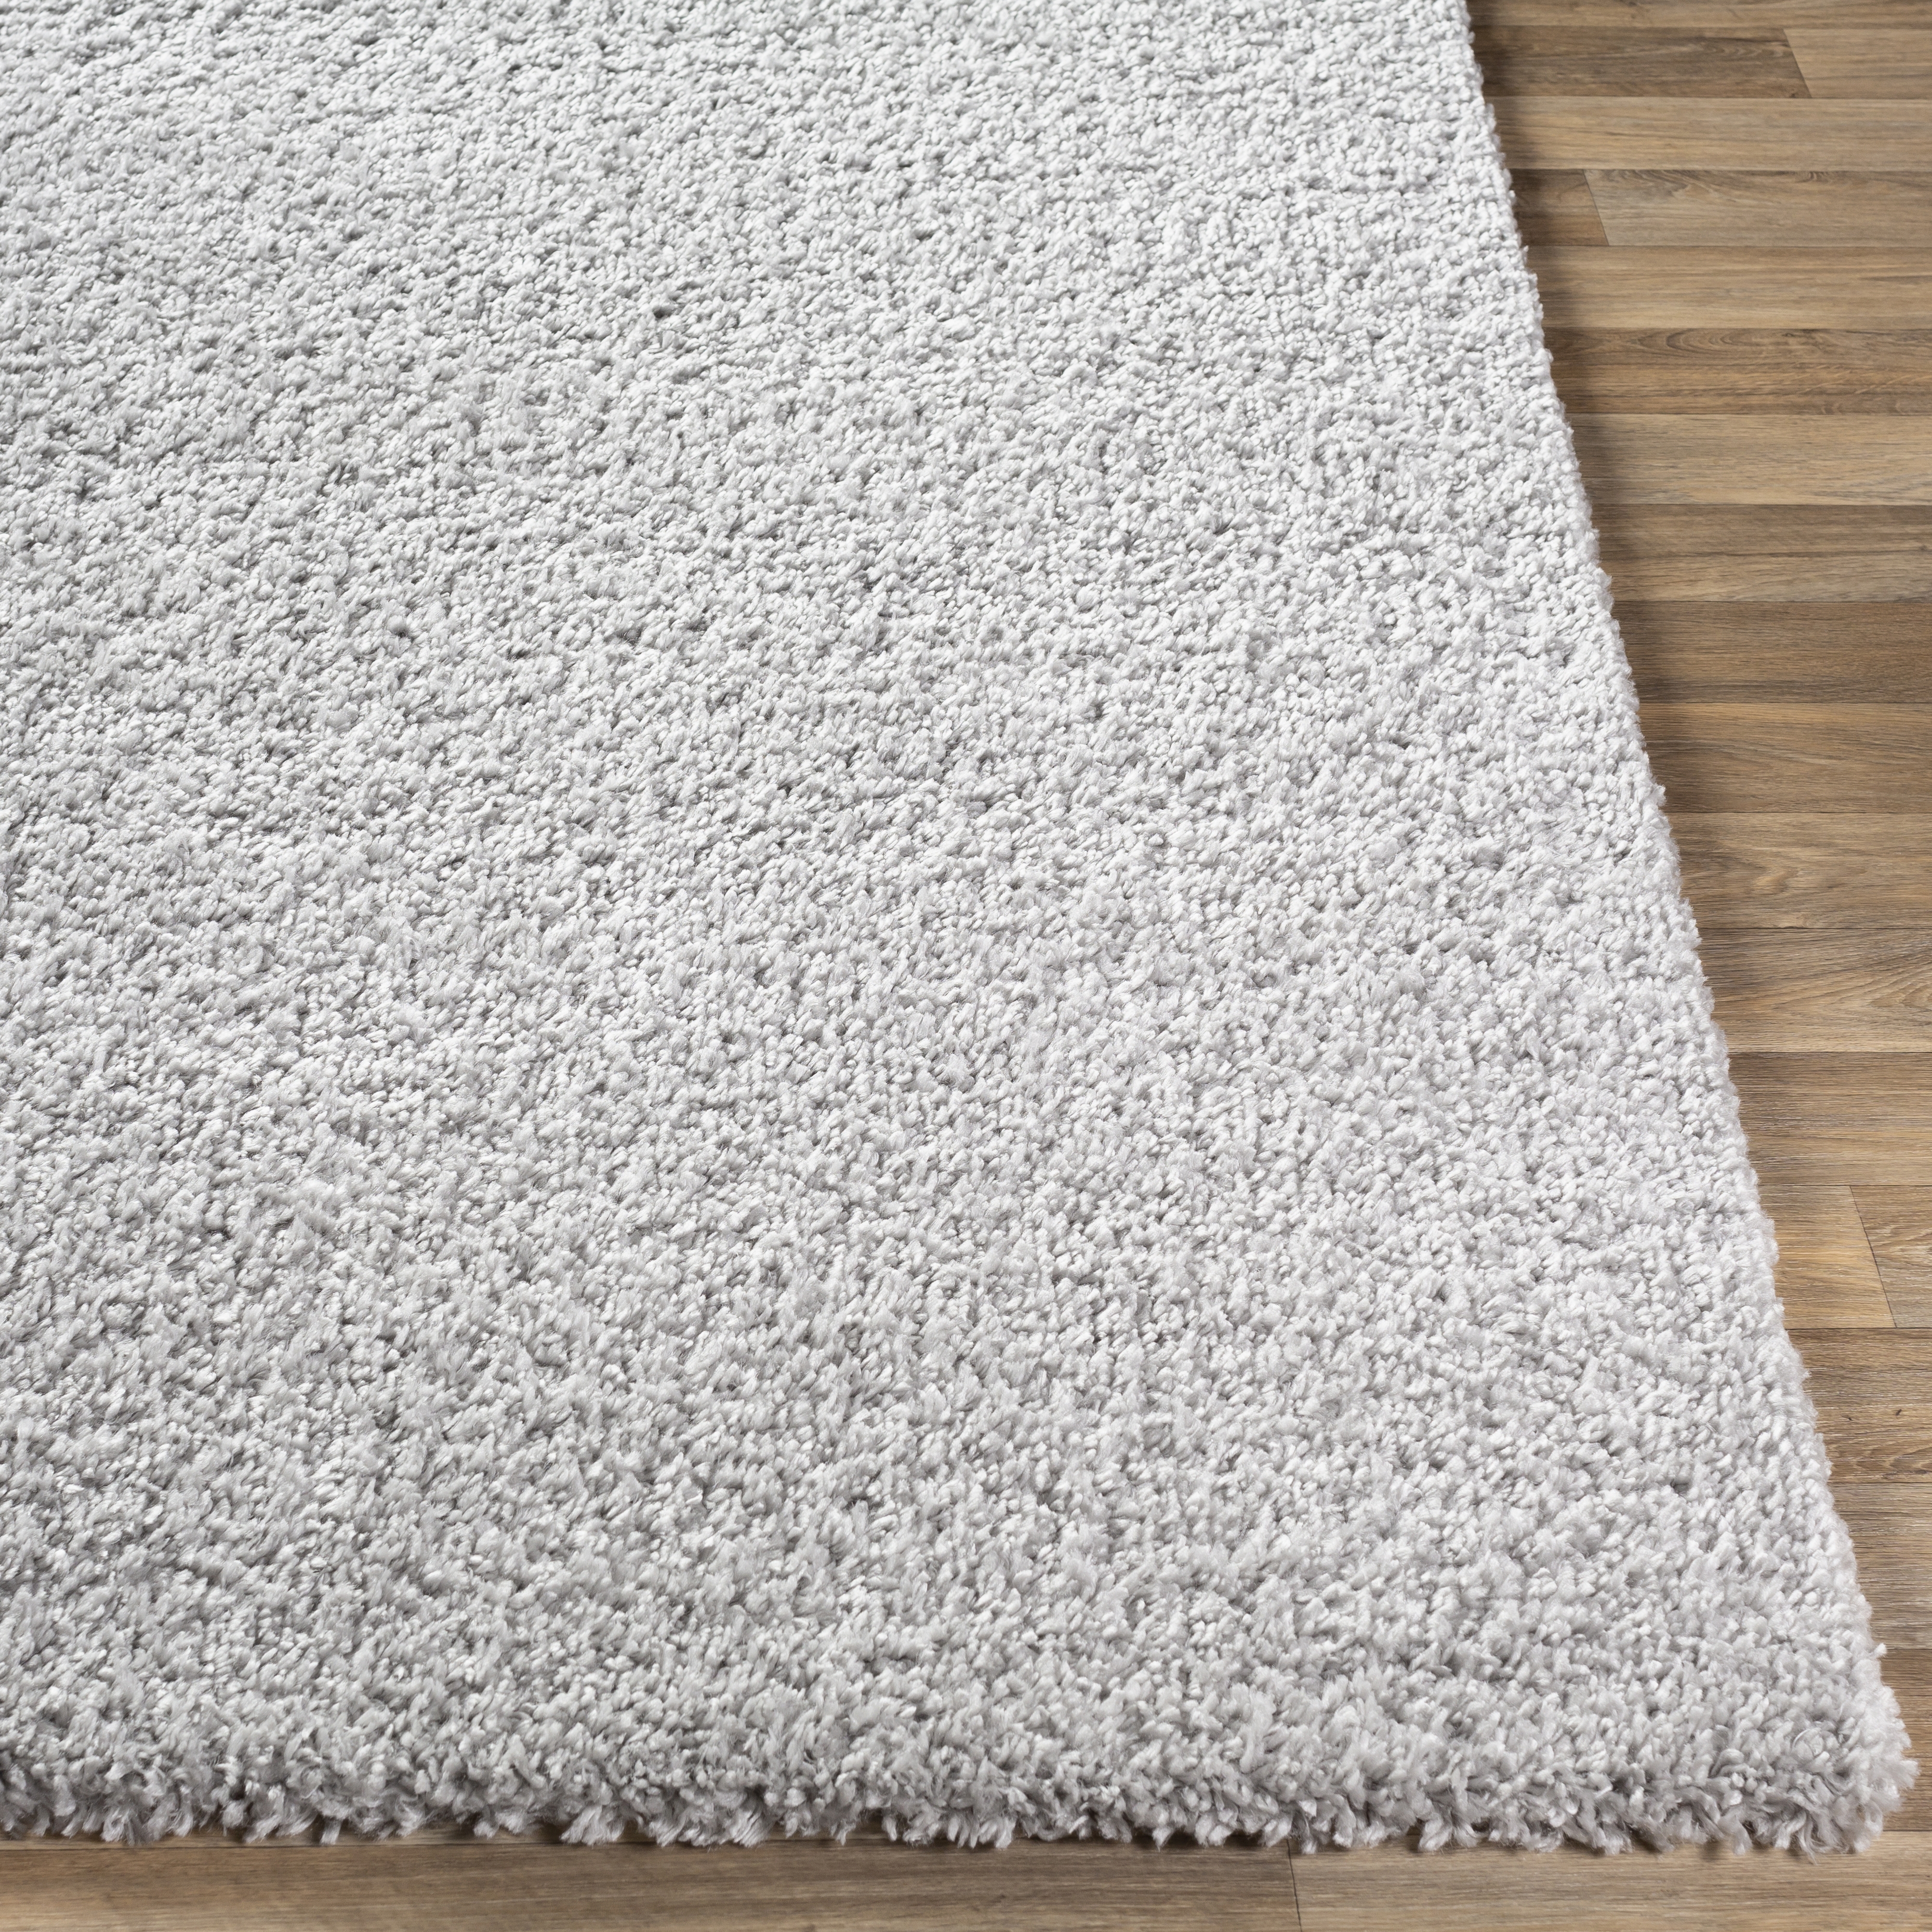 Deluxe Shag Rug, 9' x 12' - Image 2